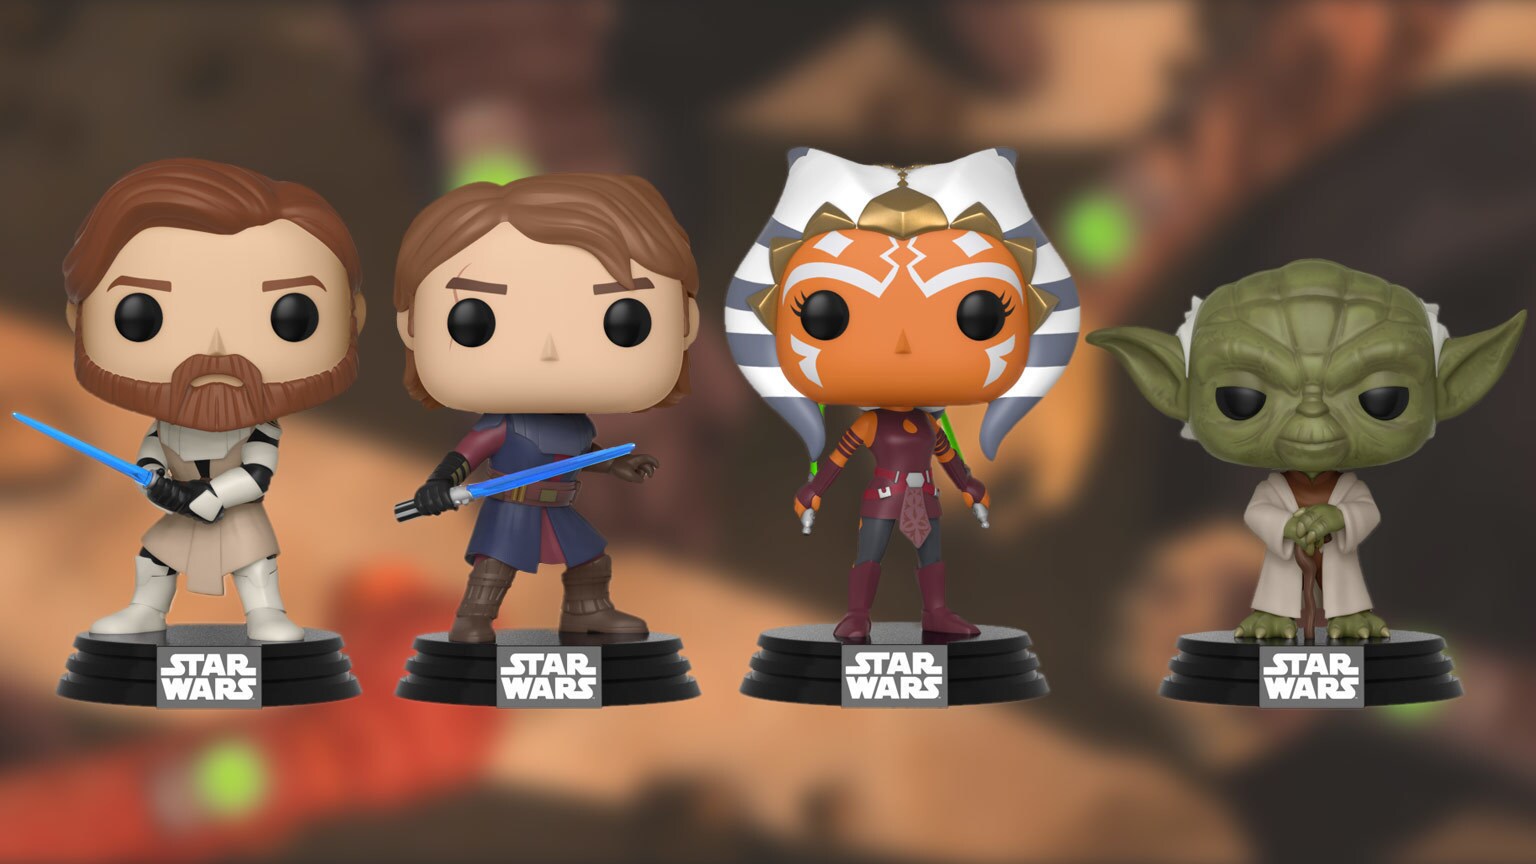 Pop! Goes Star Wars: The Clone Wars: A Q&A with Funko's Reis O'Brien